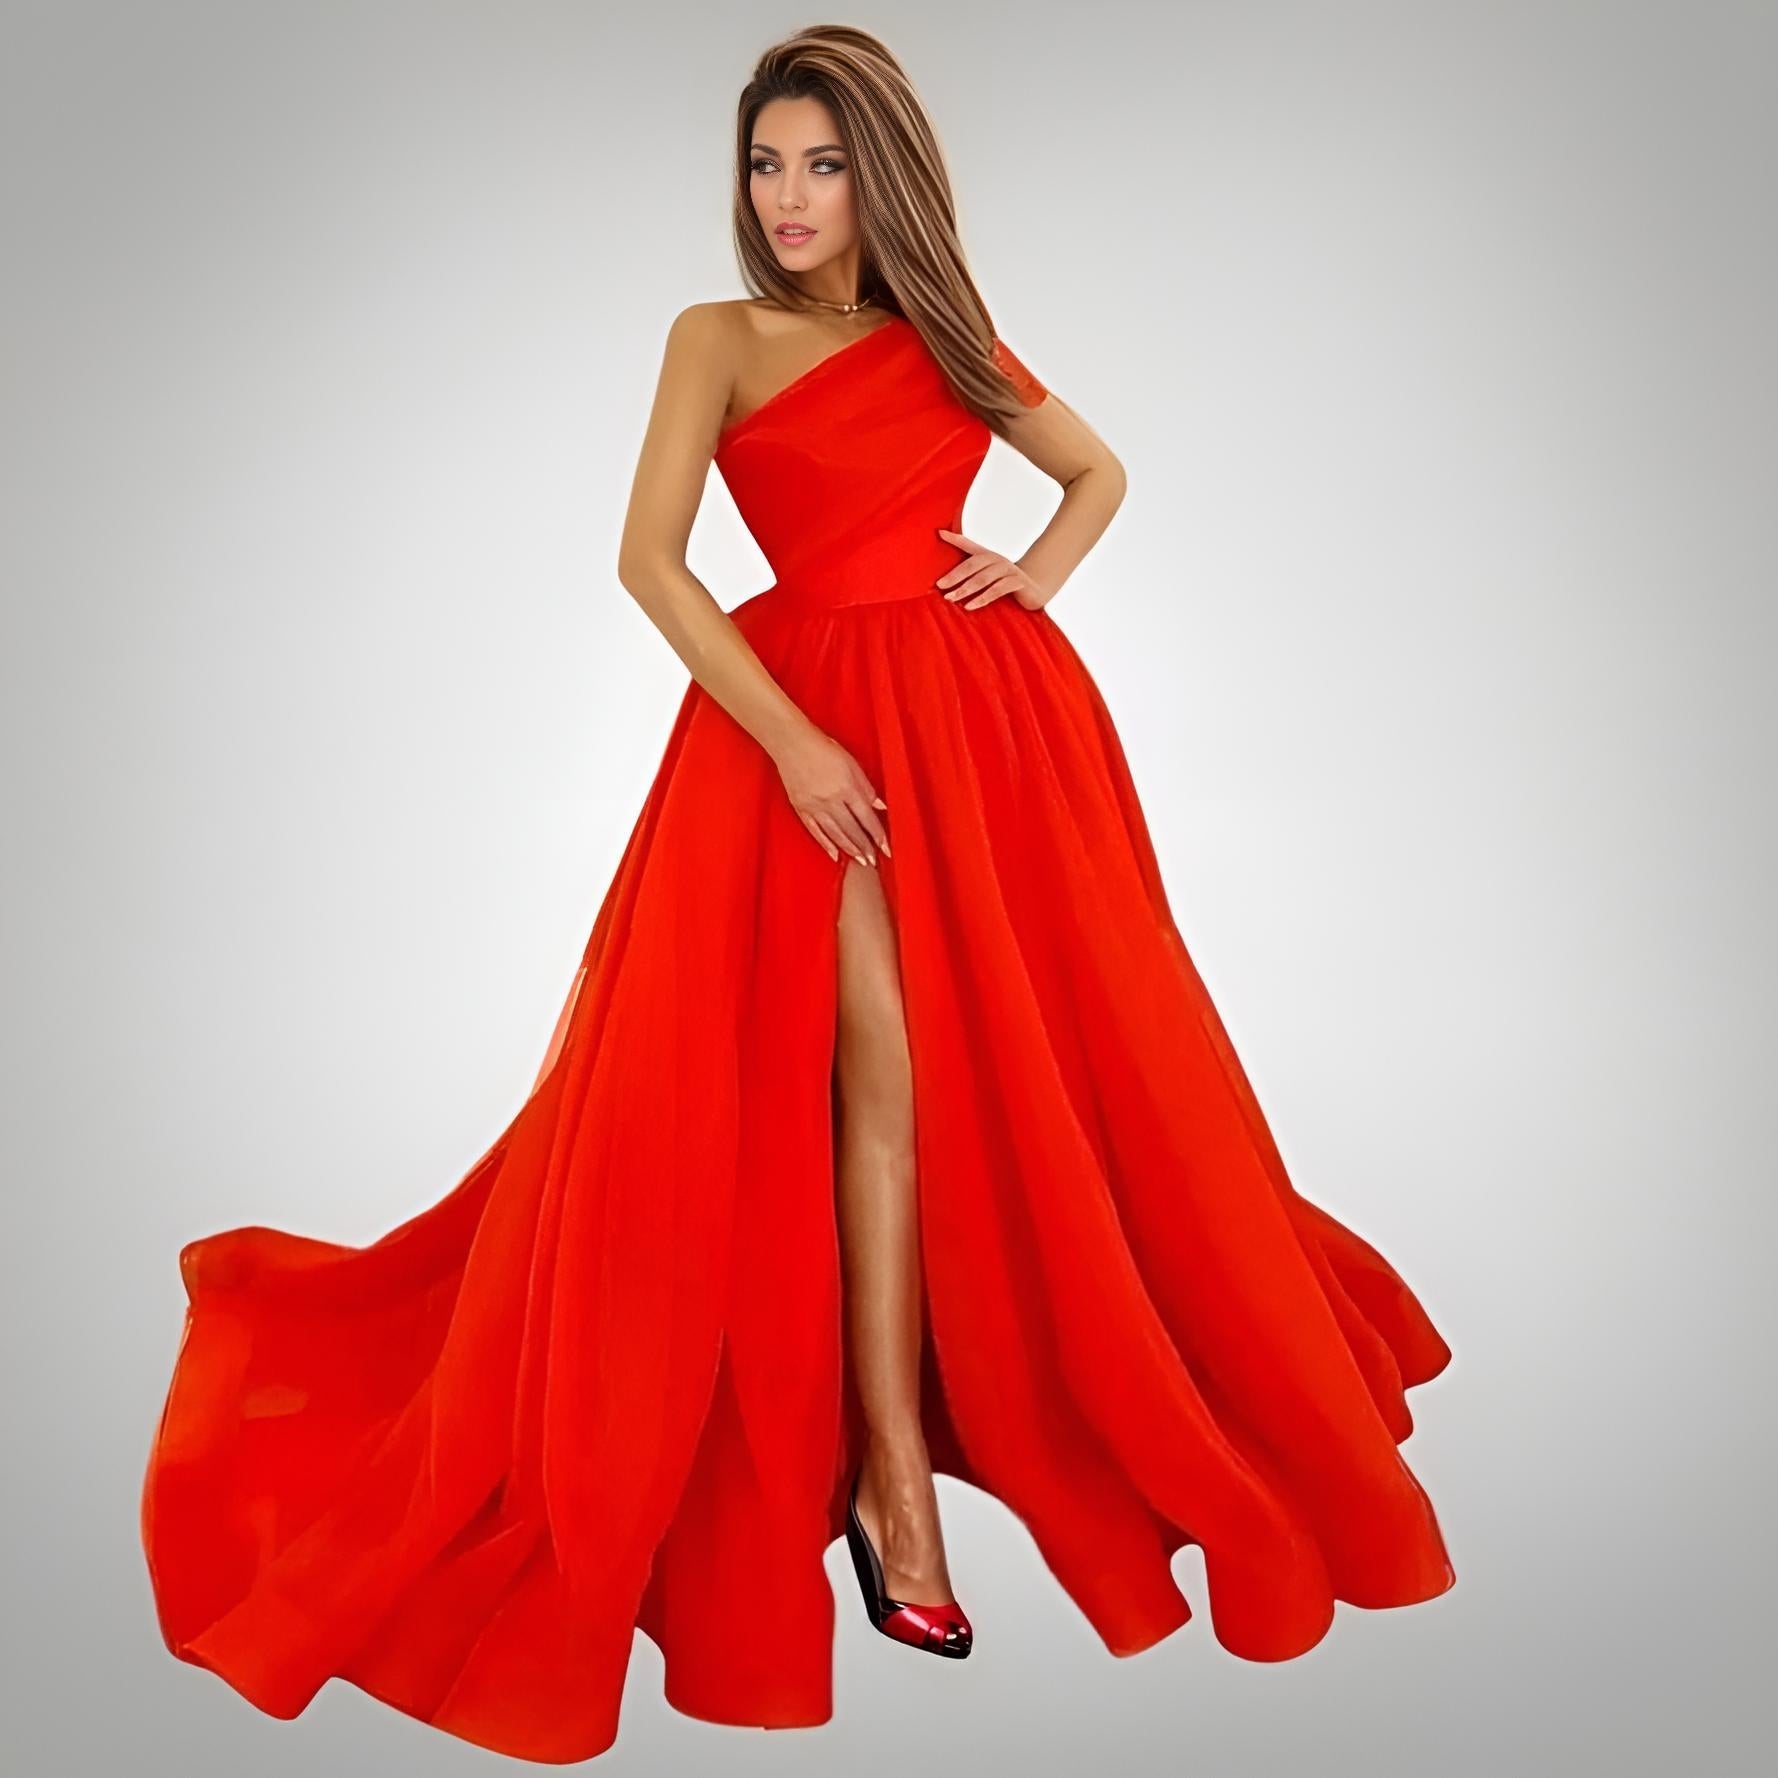 Female model in Bright Red Elegant Organza Gown with High Slit